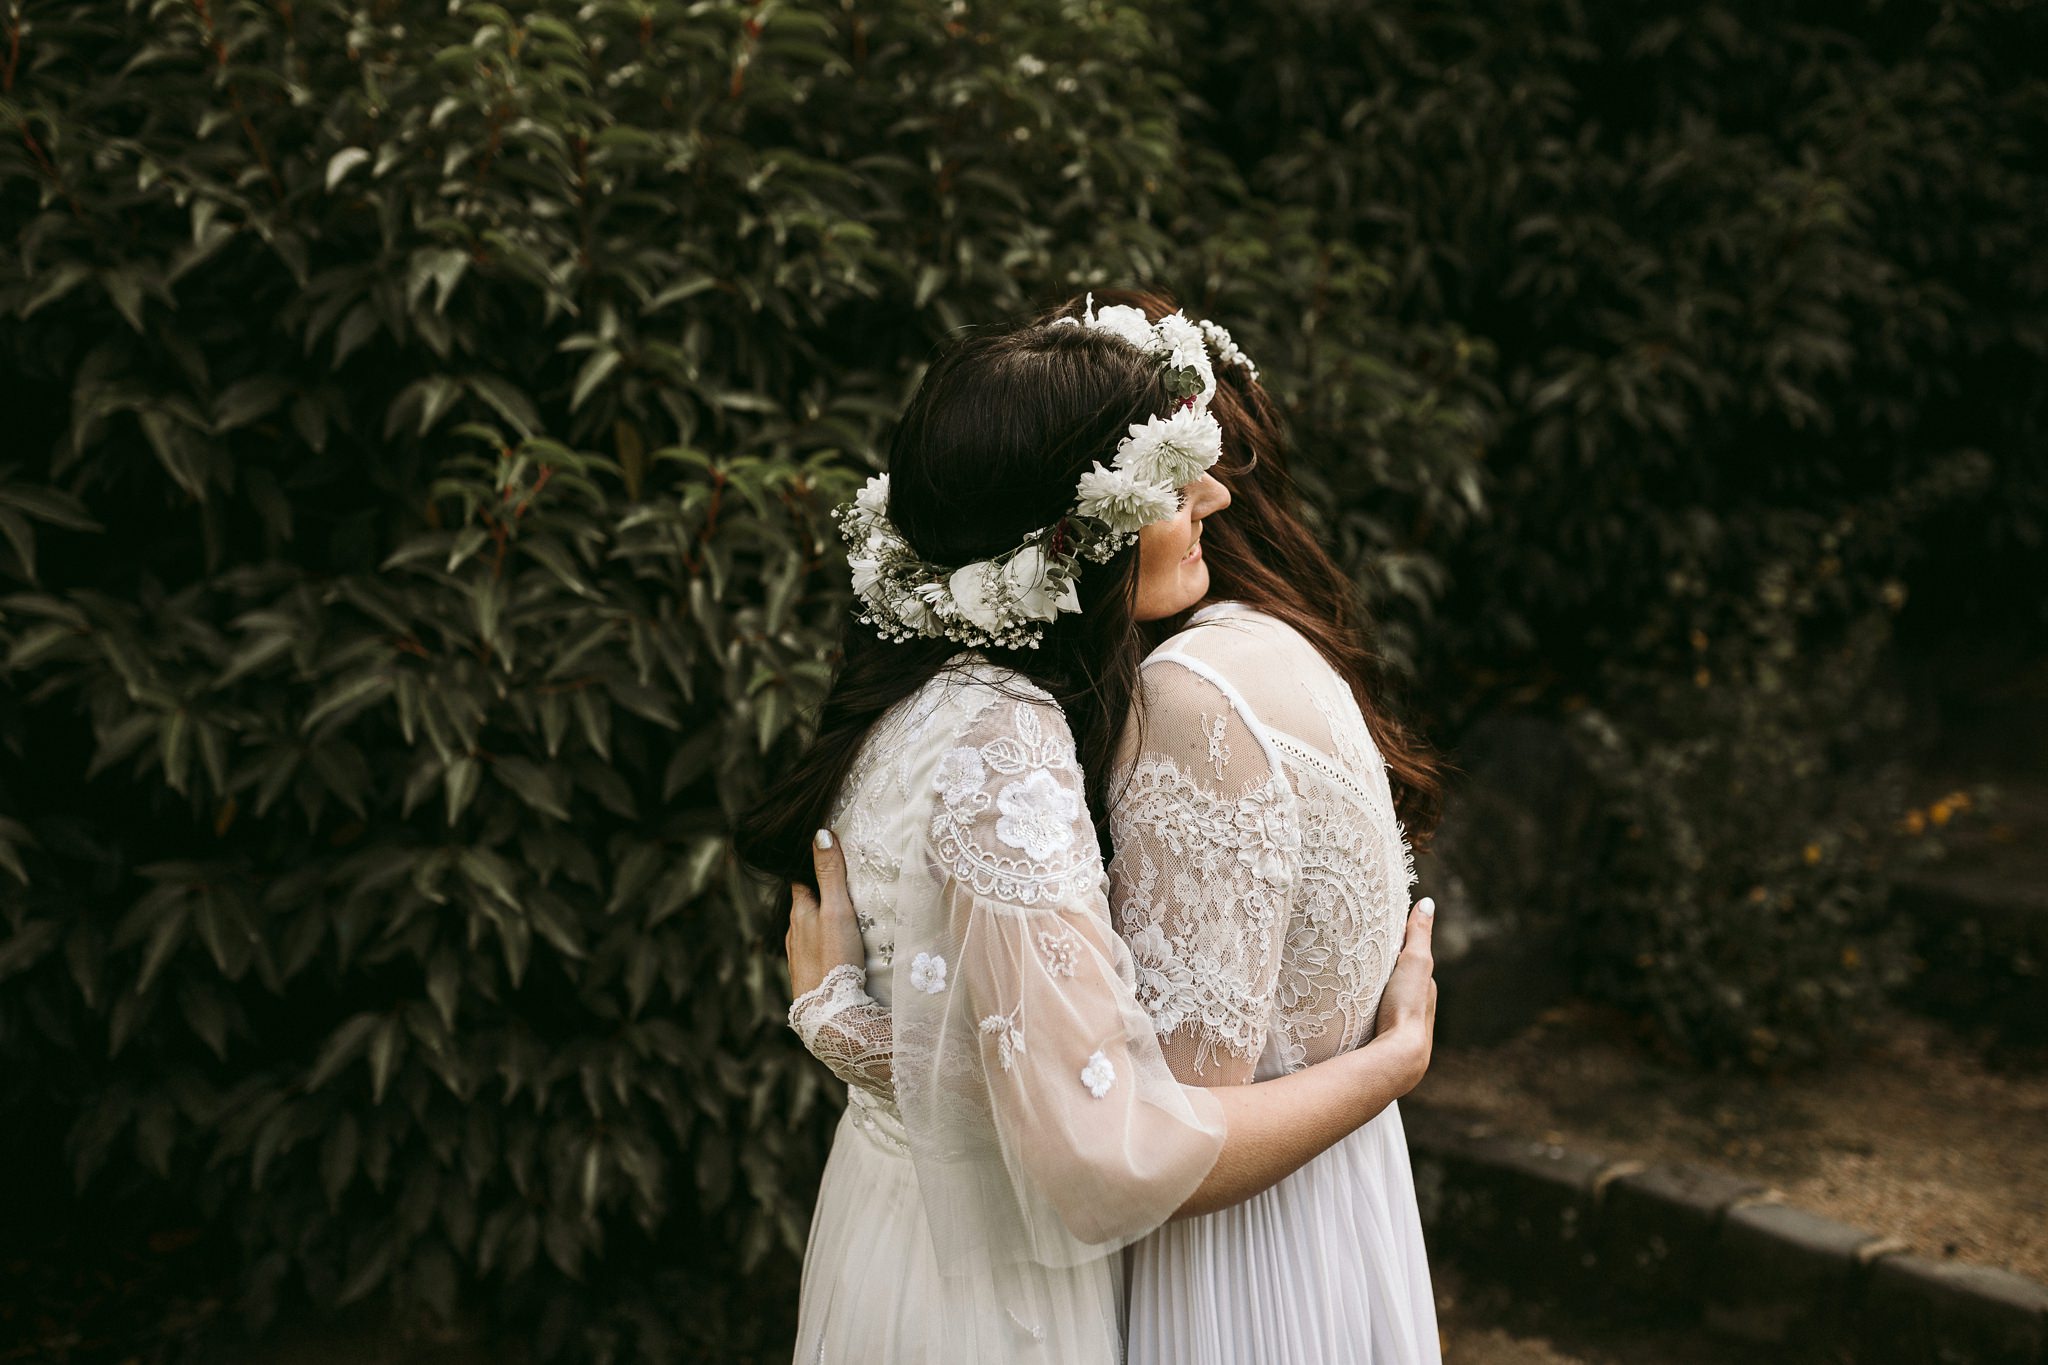 Melbourne Alternative Elopement Photography / Fun candid tiny wedding in Melbourne / Fitzroy Gardens Relaxed Elopement Photography / Melbourne Wedding Photography / Gold and Grit Photography